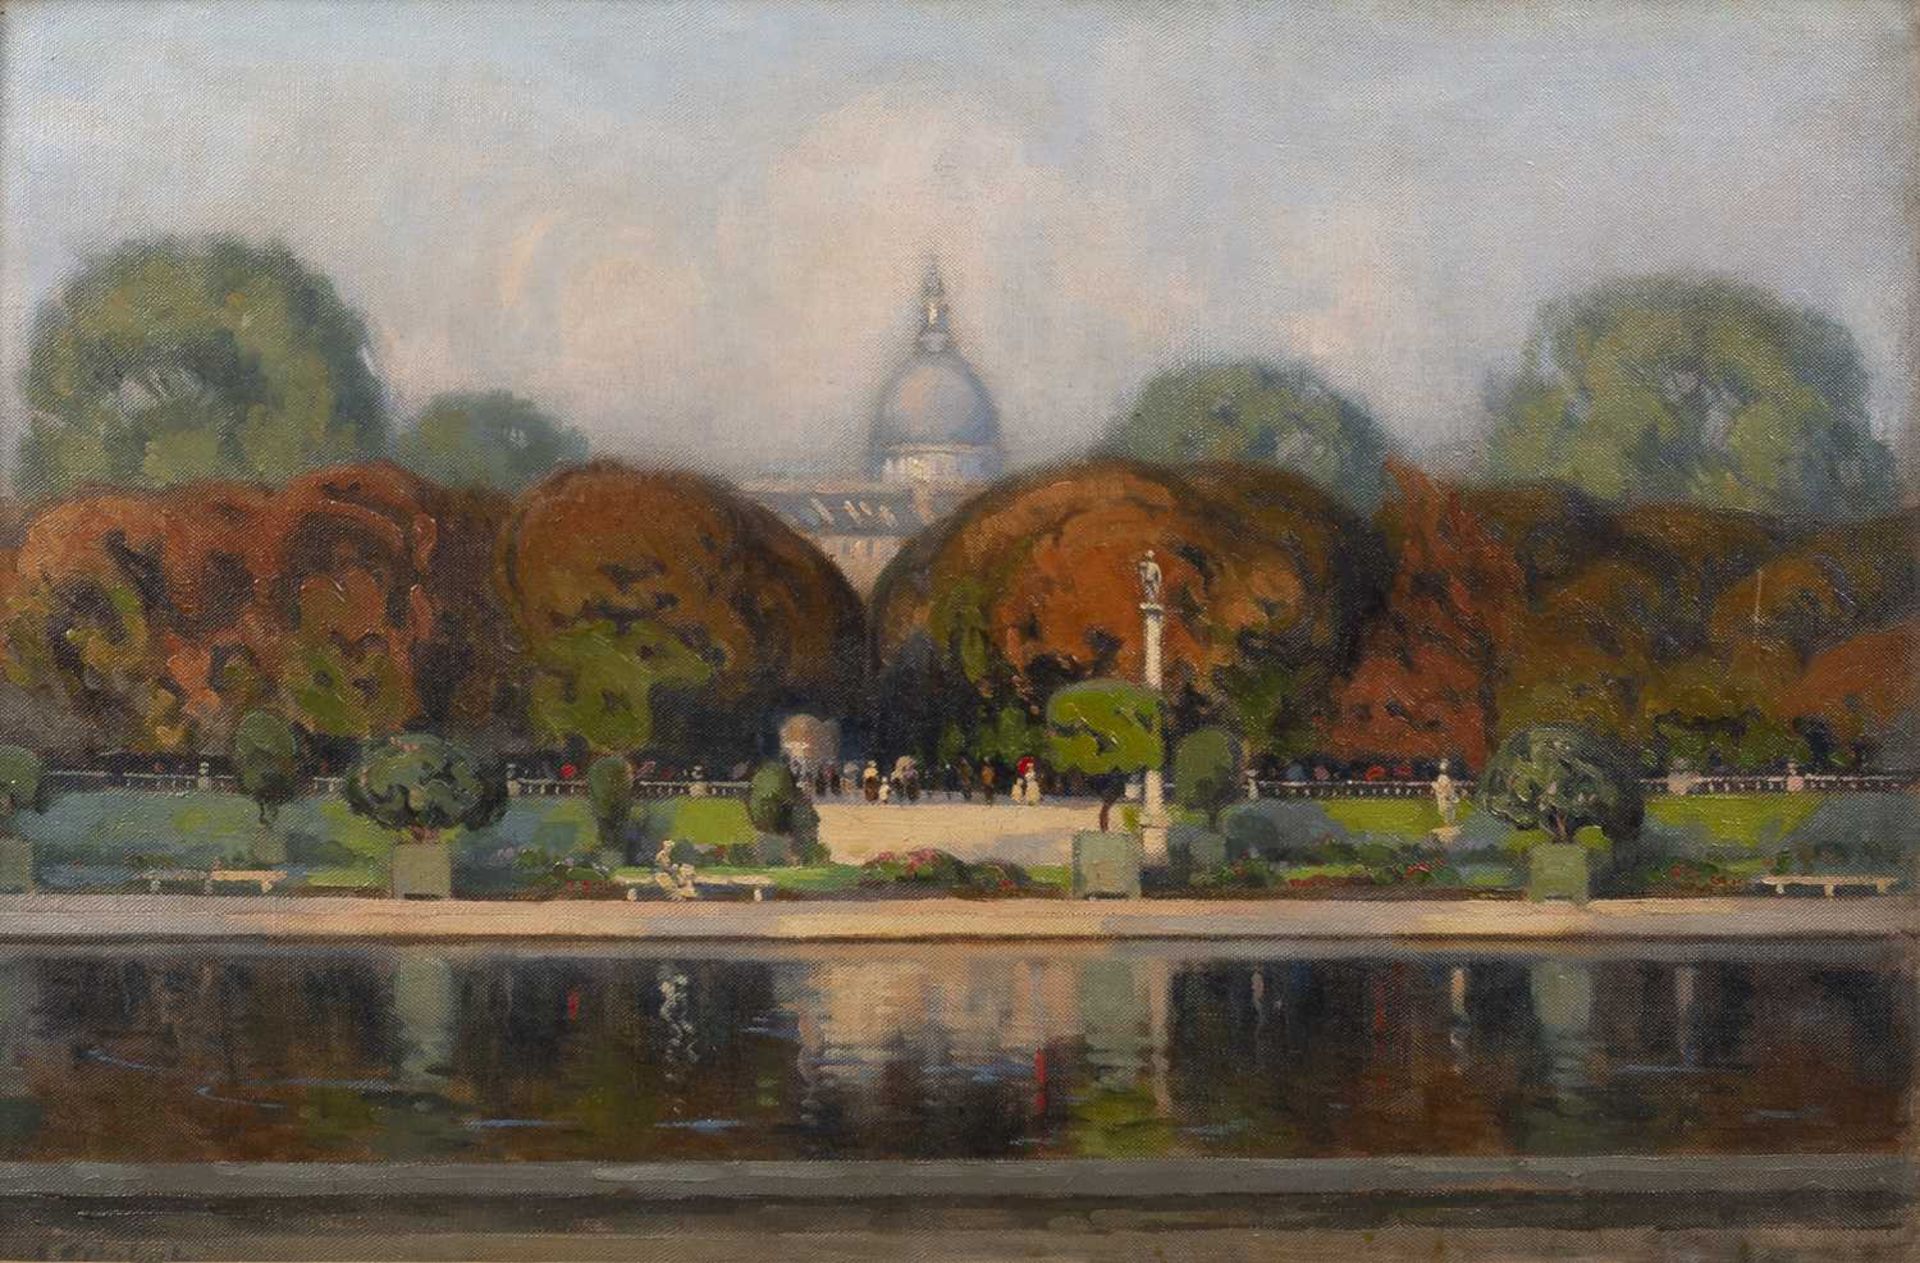 John Mansfield Crealock (1871-1959) Luxembourg Gardens signed (lower left), titled, and dated (to